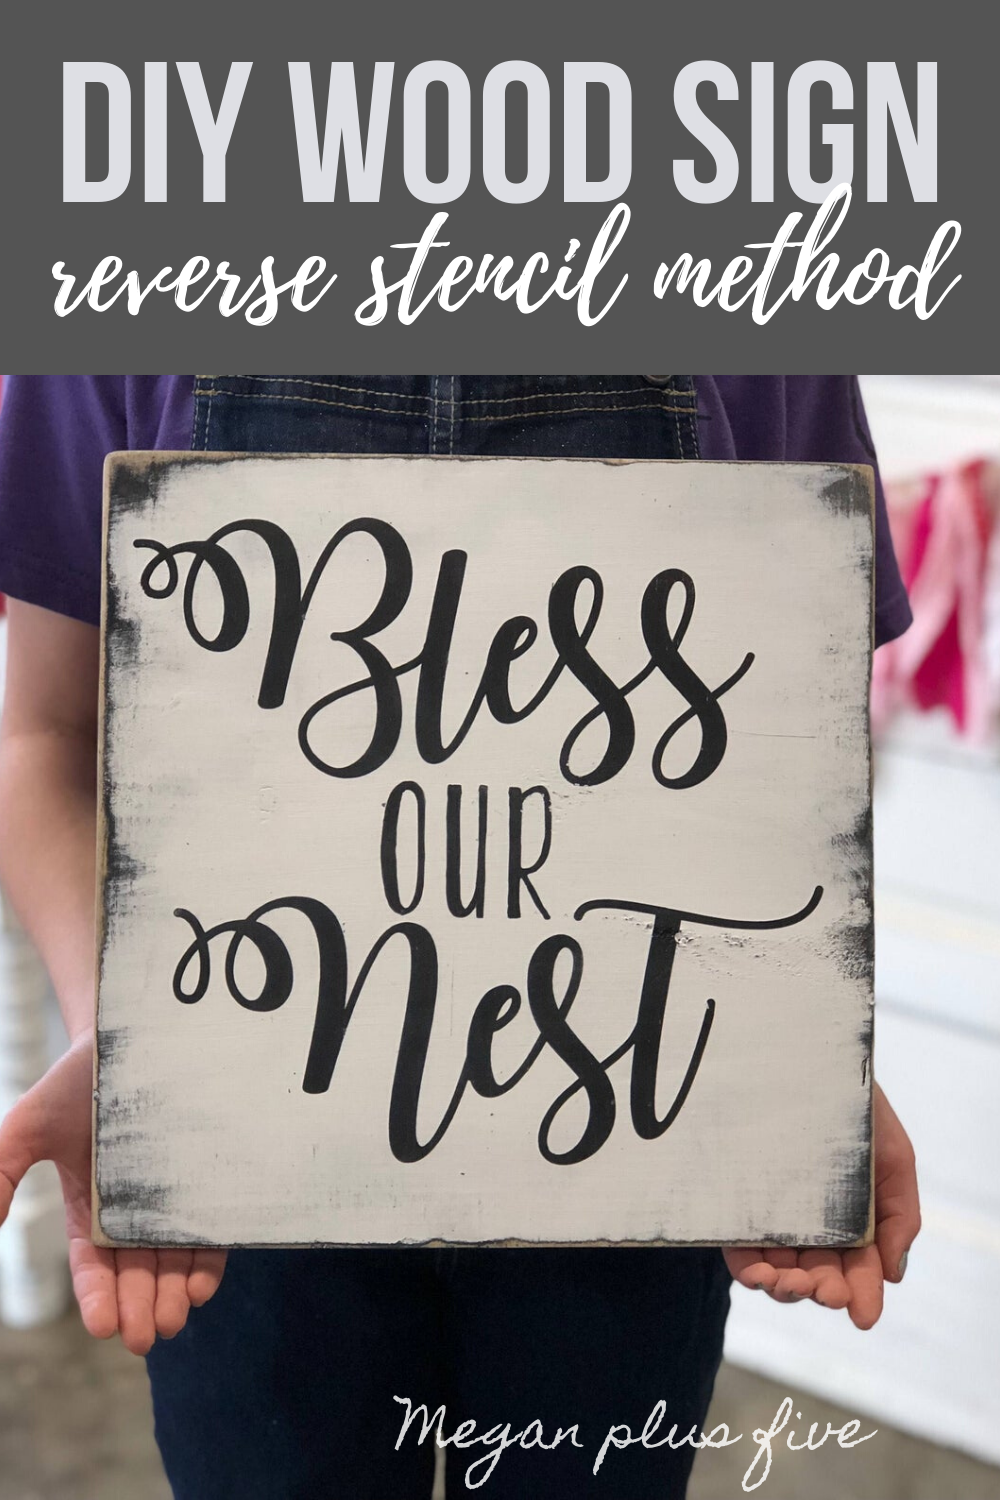 DIY wood sign, how to paint a reverse stenciled wooden sign. Make your own rustic wooden sign using your Cricut. Bless our nest wooden sign to hang with your farmhouse style decor. How to stencil on wood, a sign painting tutorial with video.